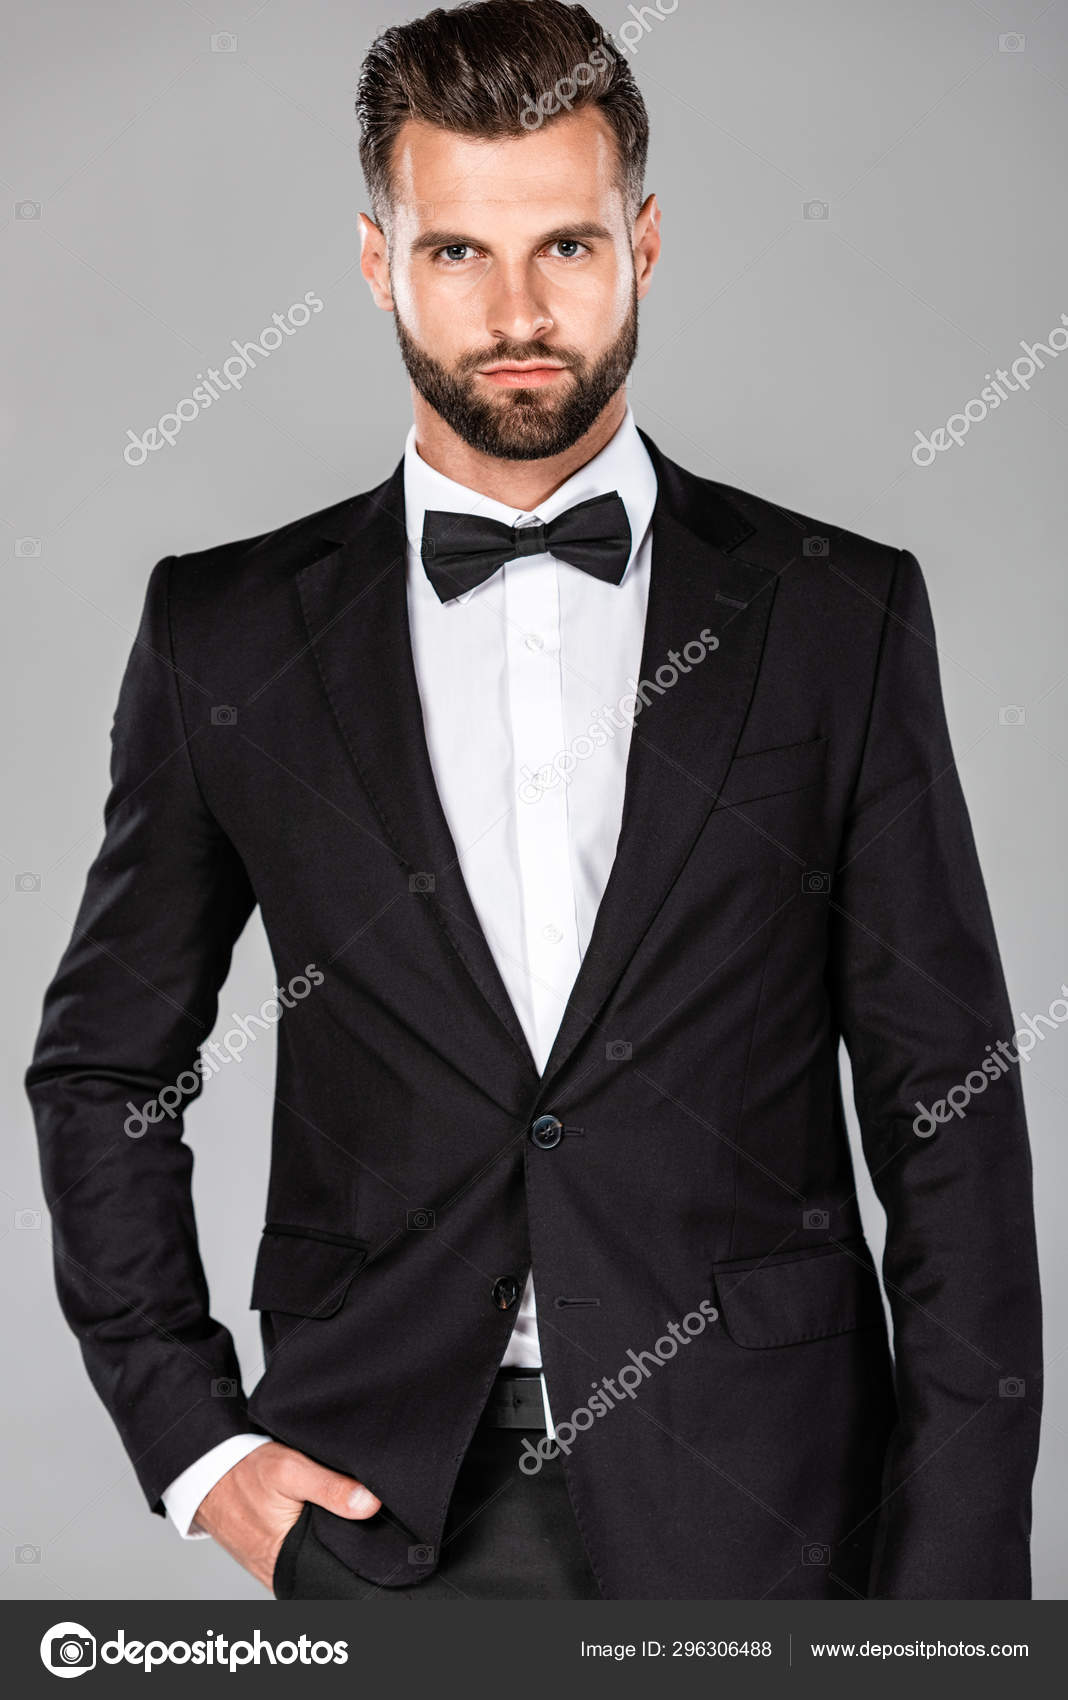 all black suit and bow tie